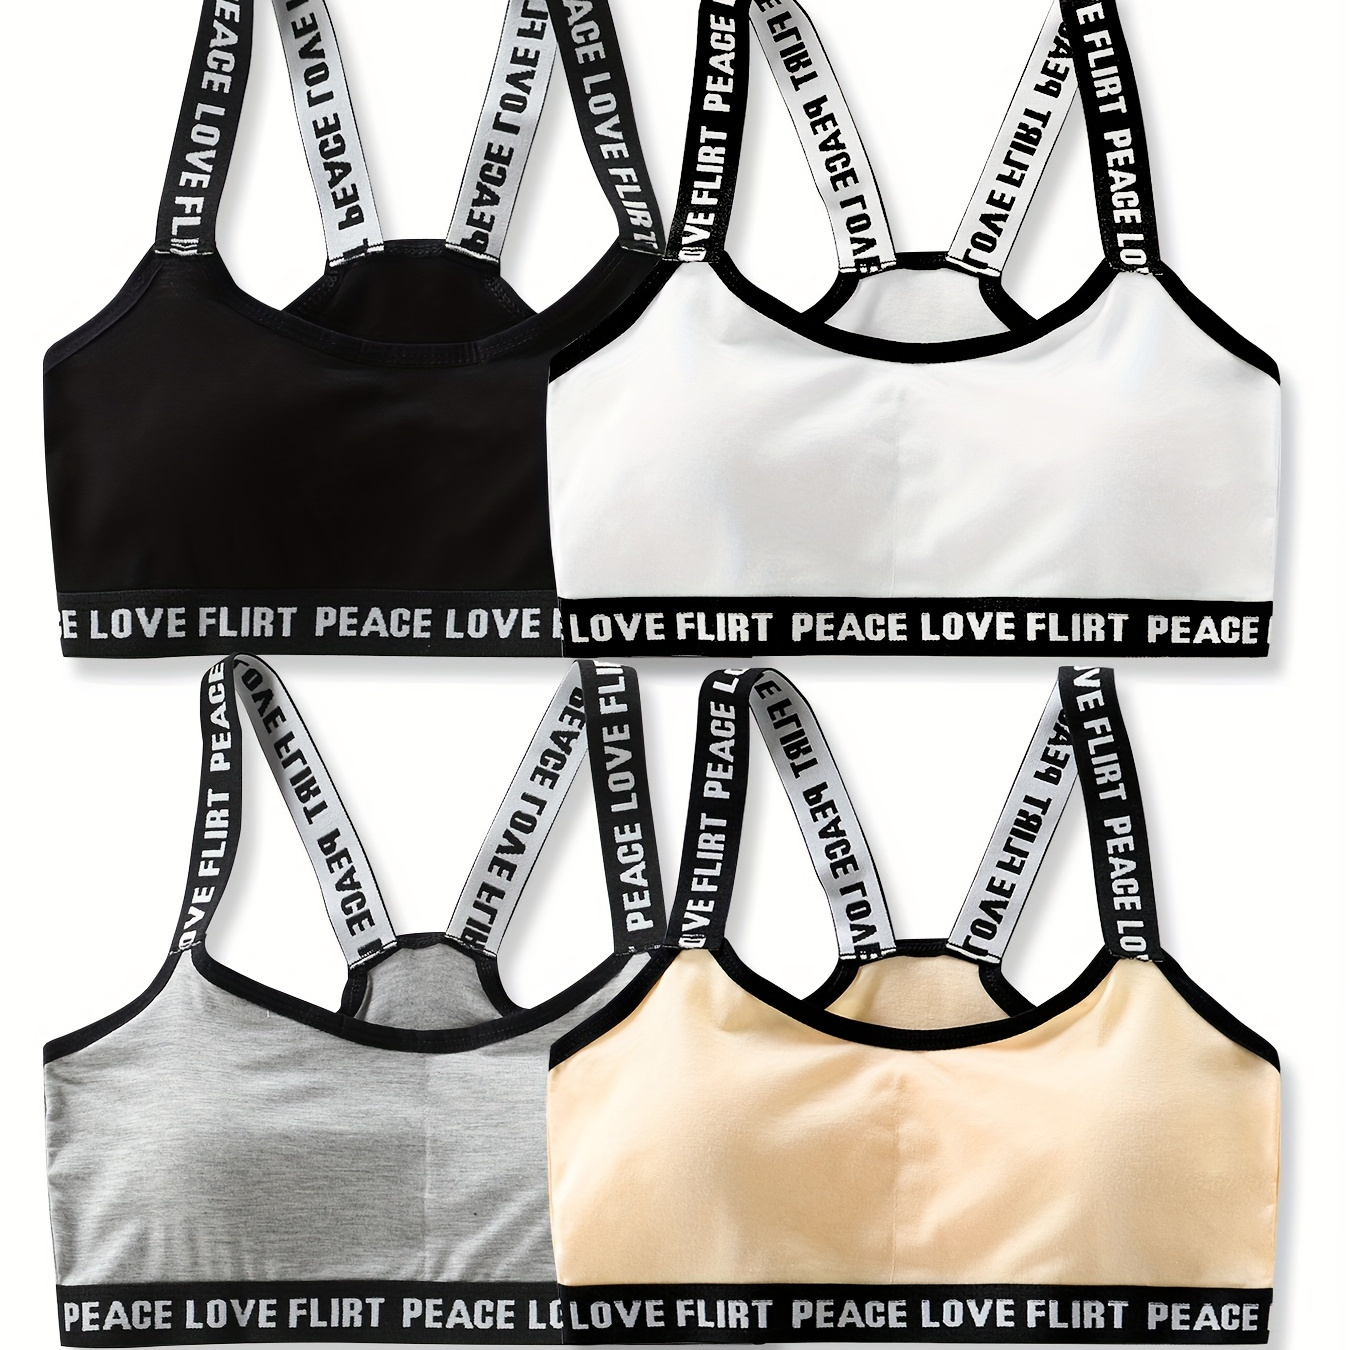 

4pcs Girl's Sports Bra, Multiple Colors Underwear, Letter Print Shoulder Strap, Breathable Comfy Soft Bralette For Students Teens 7-14 Years Old